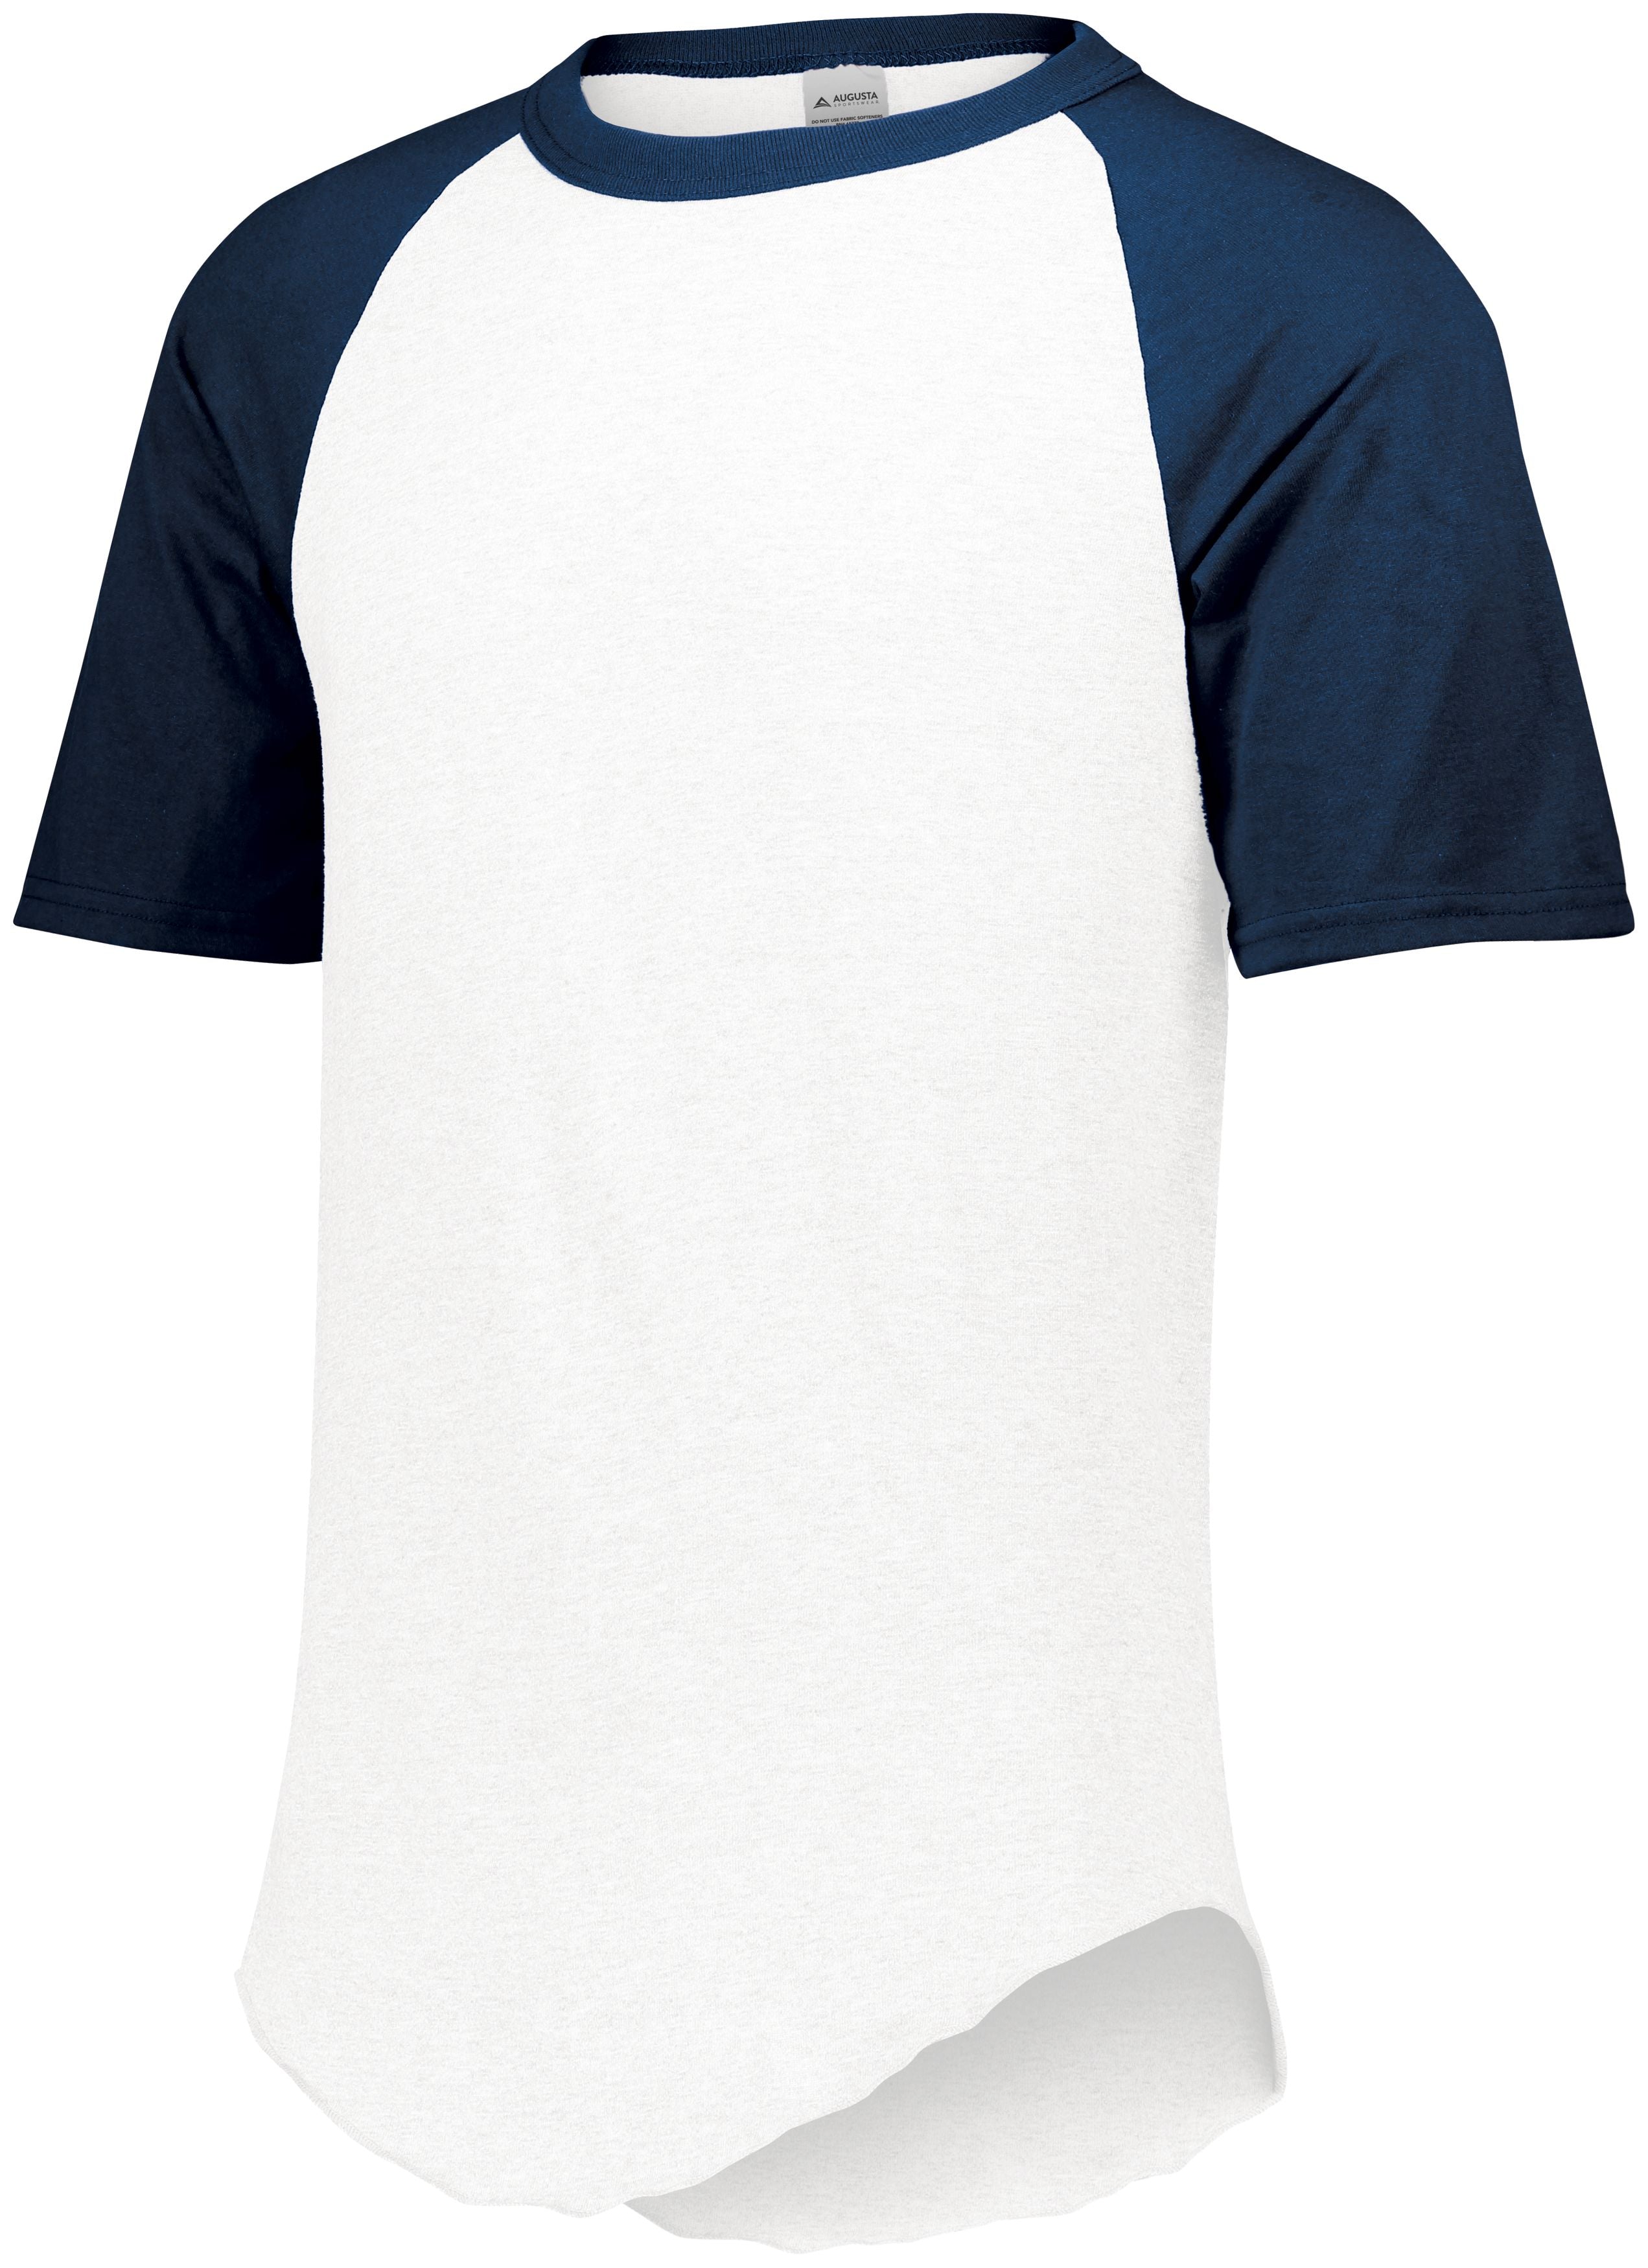 Augusta Sportswear Short Sleeve Baseball Jersey in White/Navy  -Part of the Adult, Adult-Jersey, Augusta-Products, Baseball, Shirts, All-Sports, All-Sports-1 product lines at KanaleyCreations.com